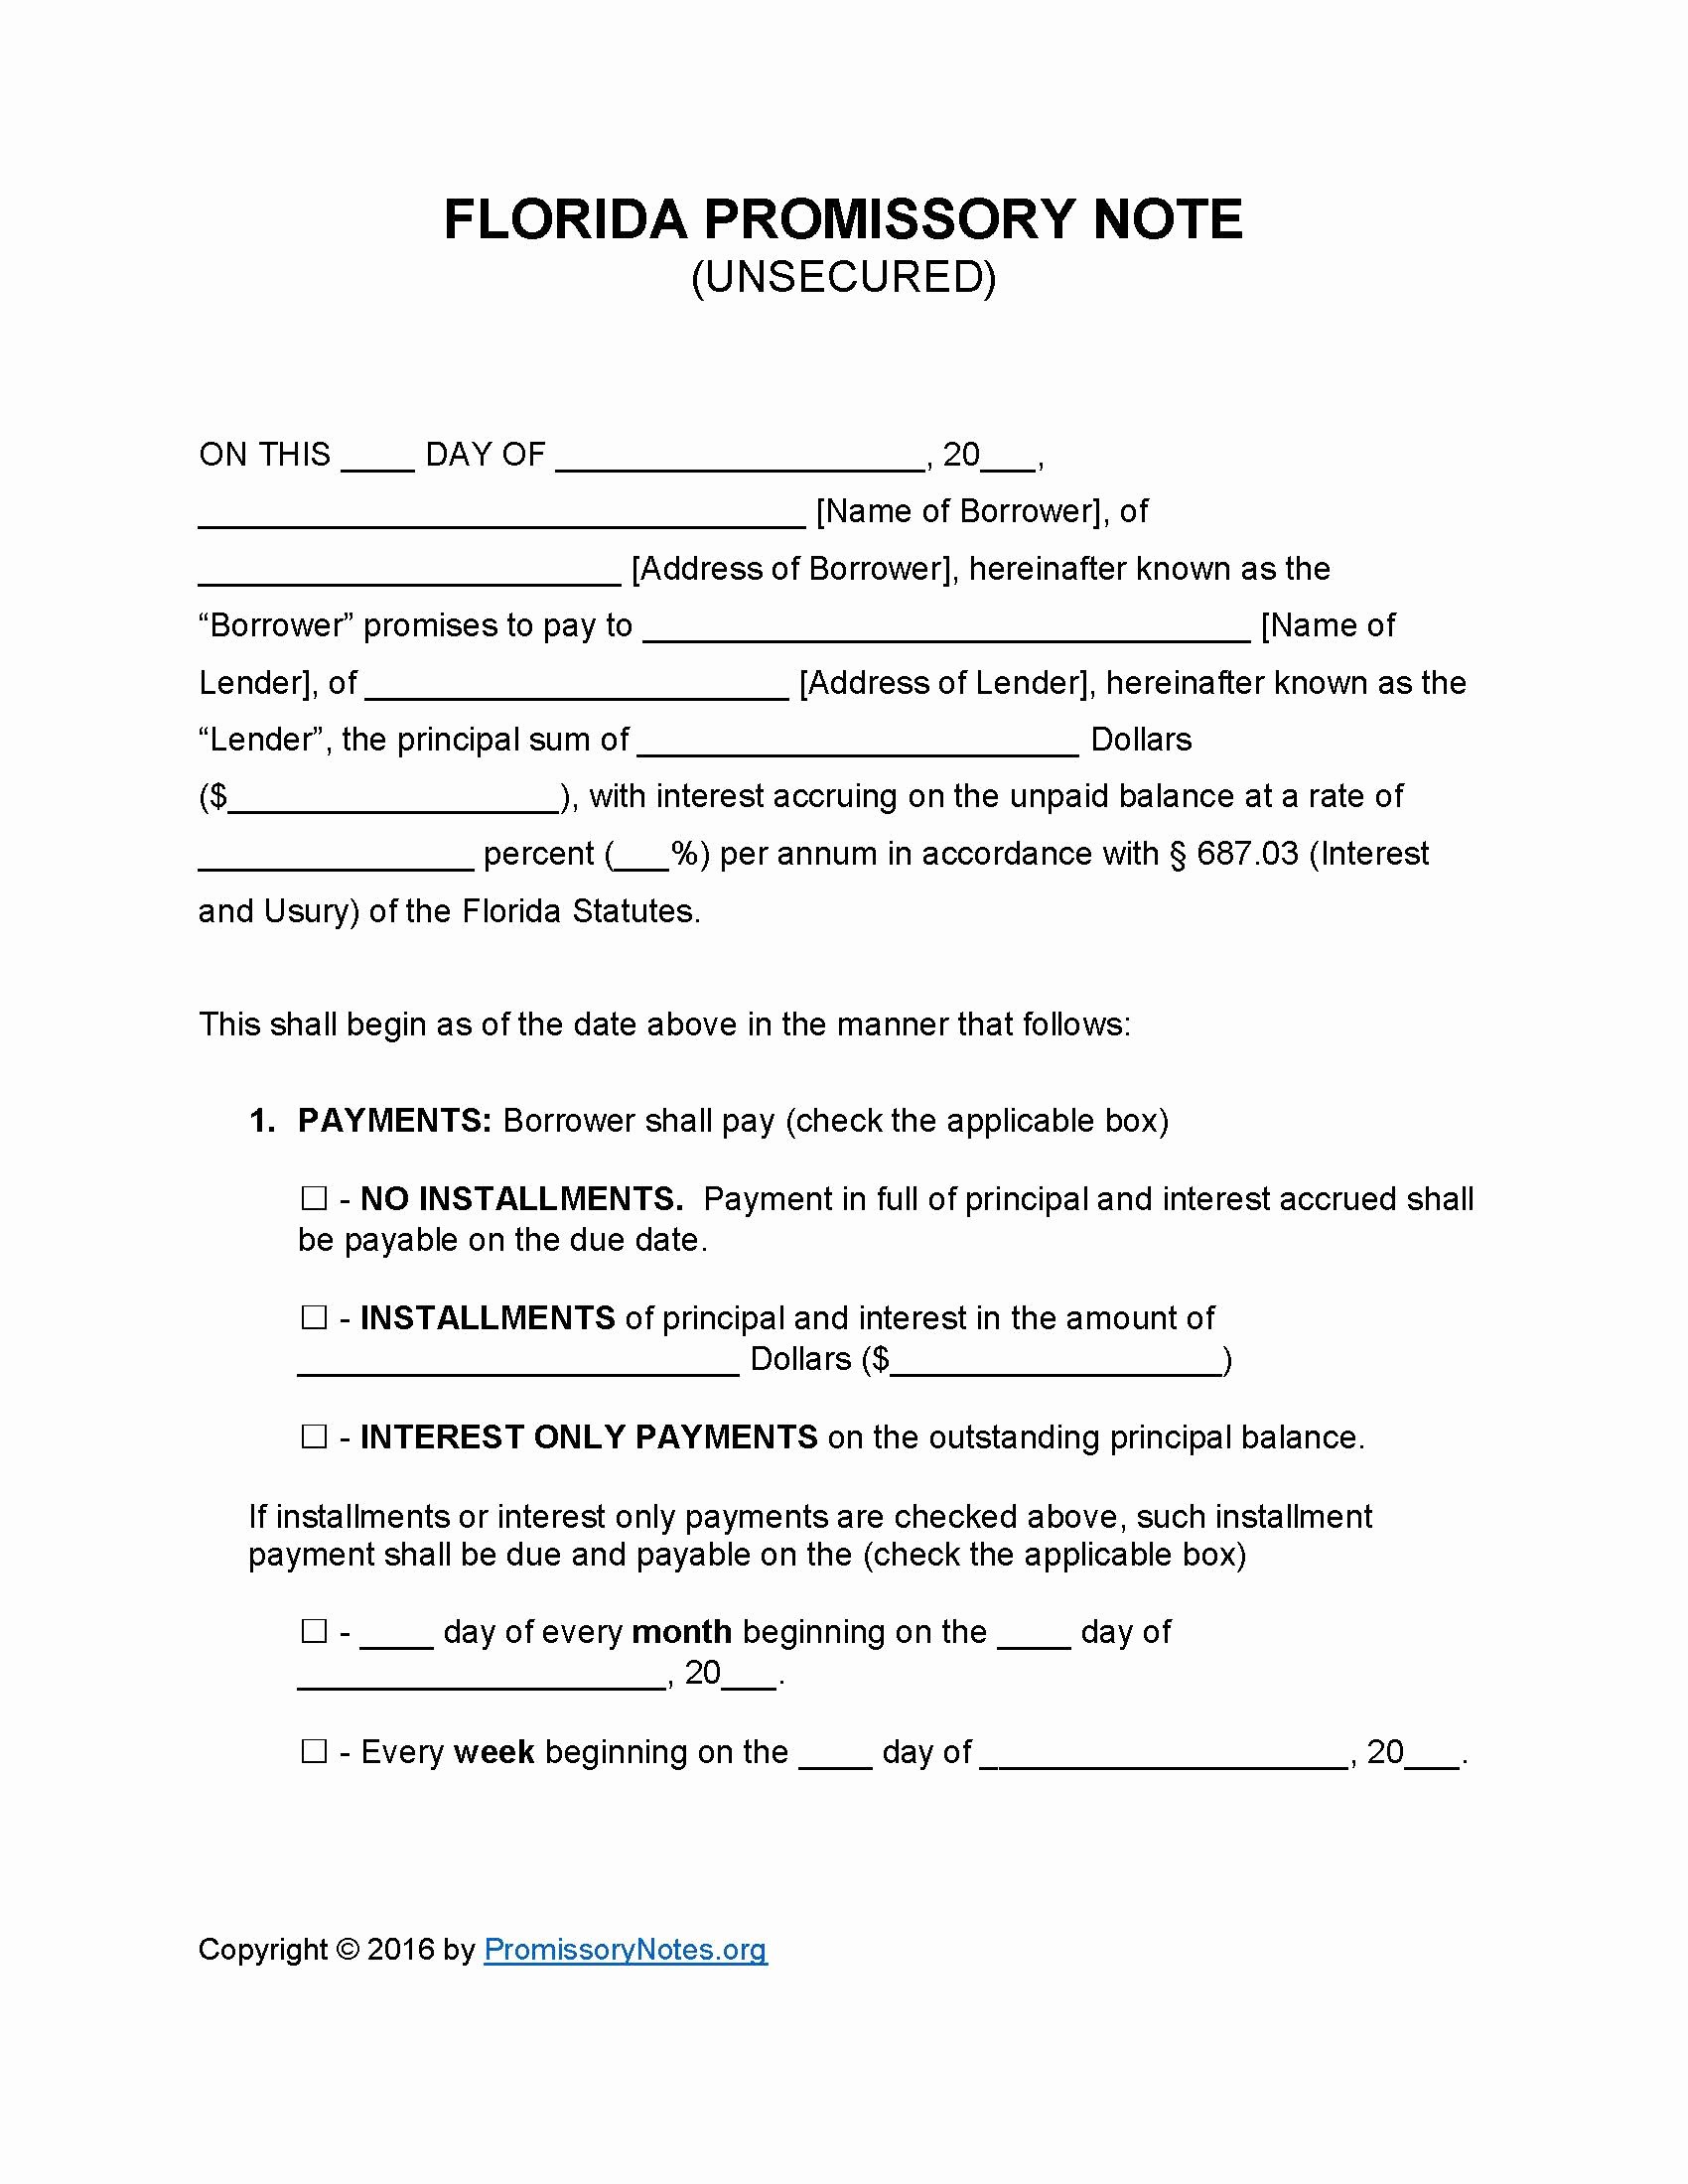 Florida Unsecured Promissory Note Template Promissory